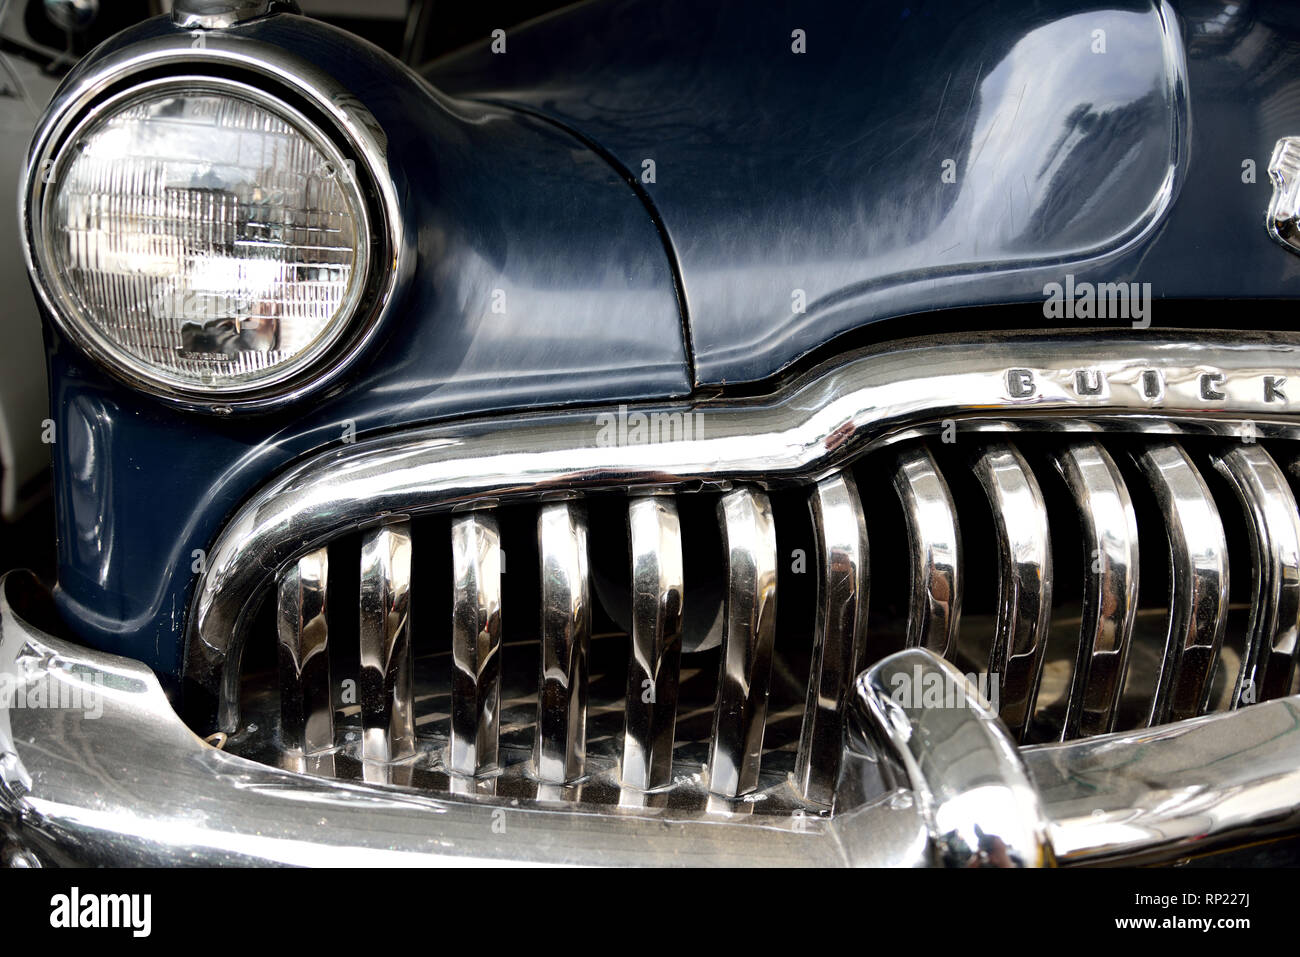 1949 Buick Roadmaster, front end grill, bumper, grill and headlight. Stock Photo